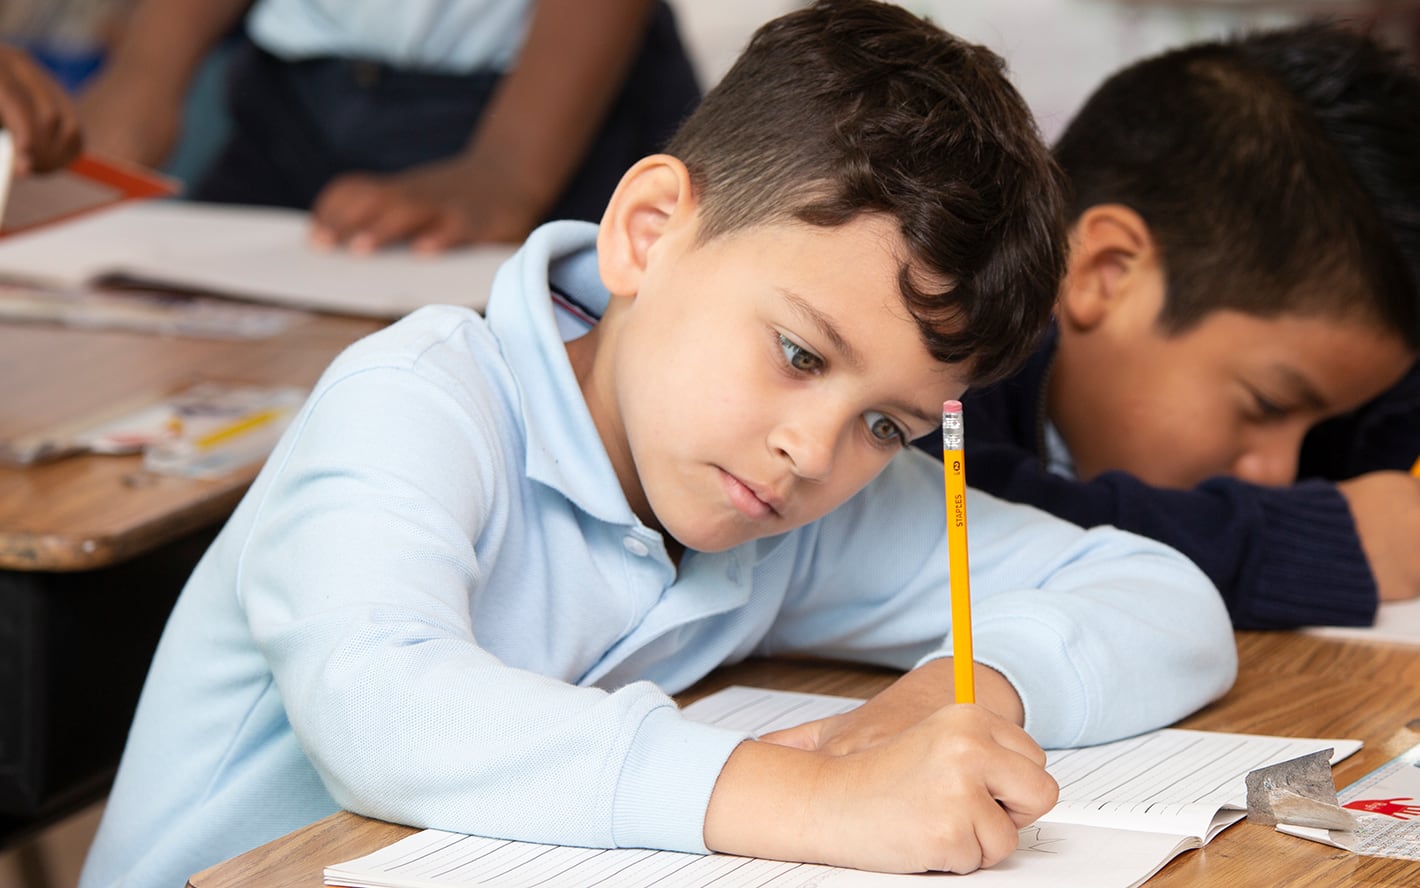 A young boy in a blue shirt focused on writing in a classroom, holding a pencil, with another student in the background.